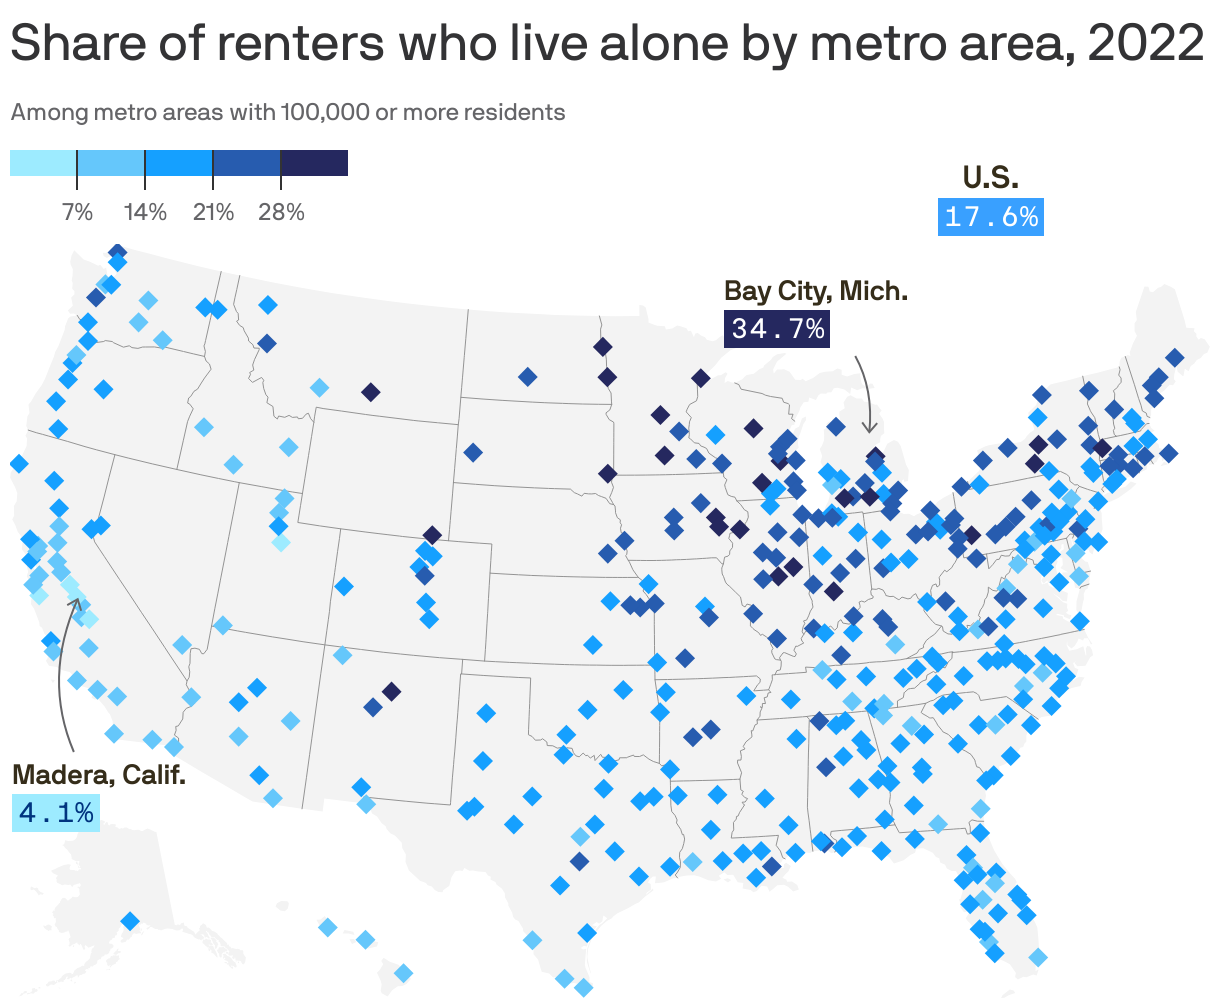 Share of solo renters by metro area, 2022